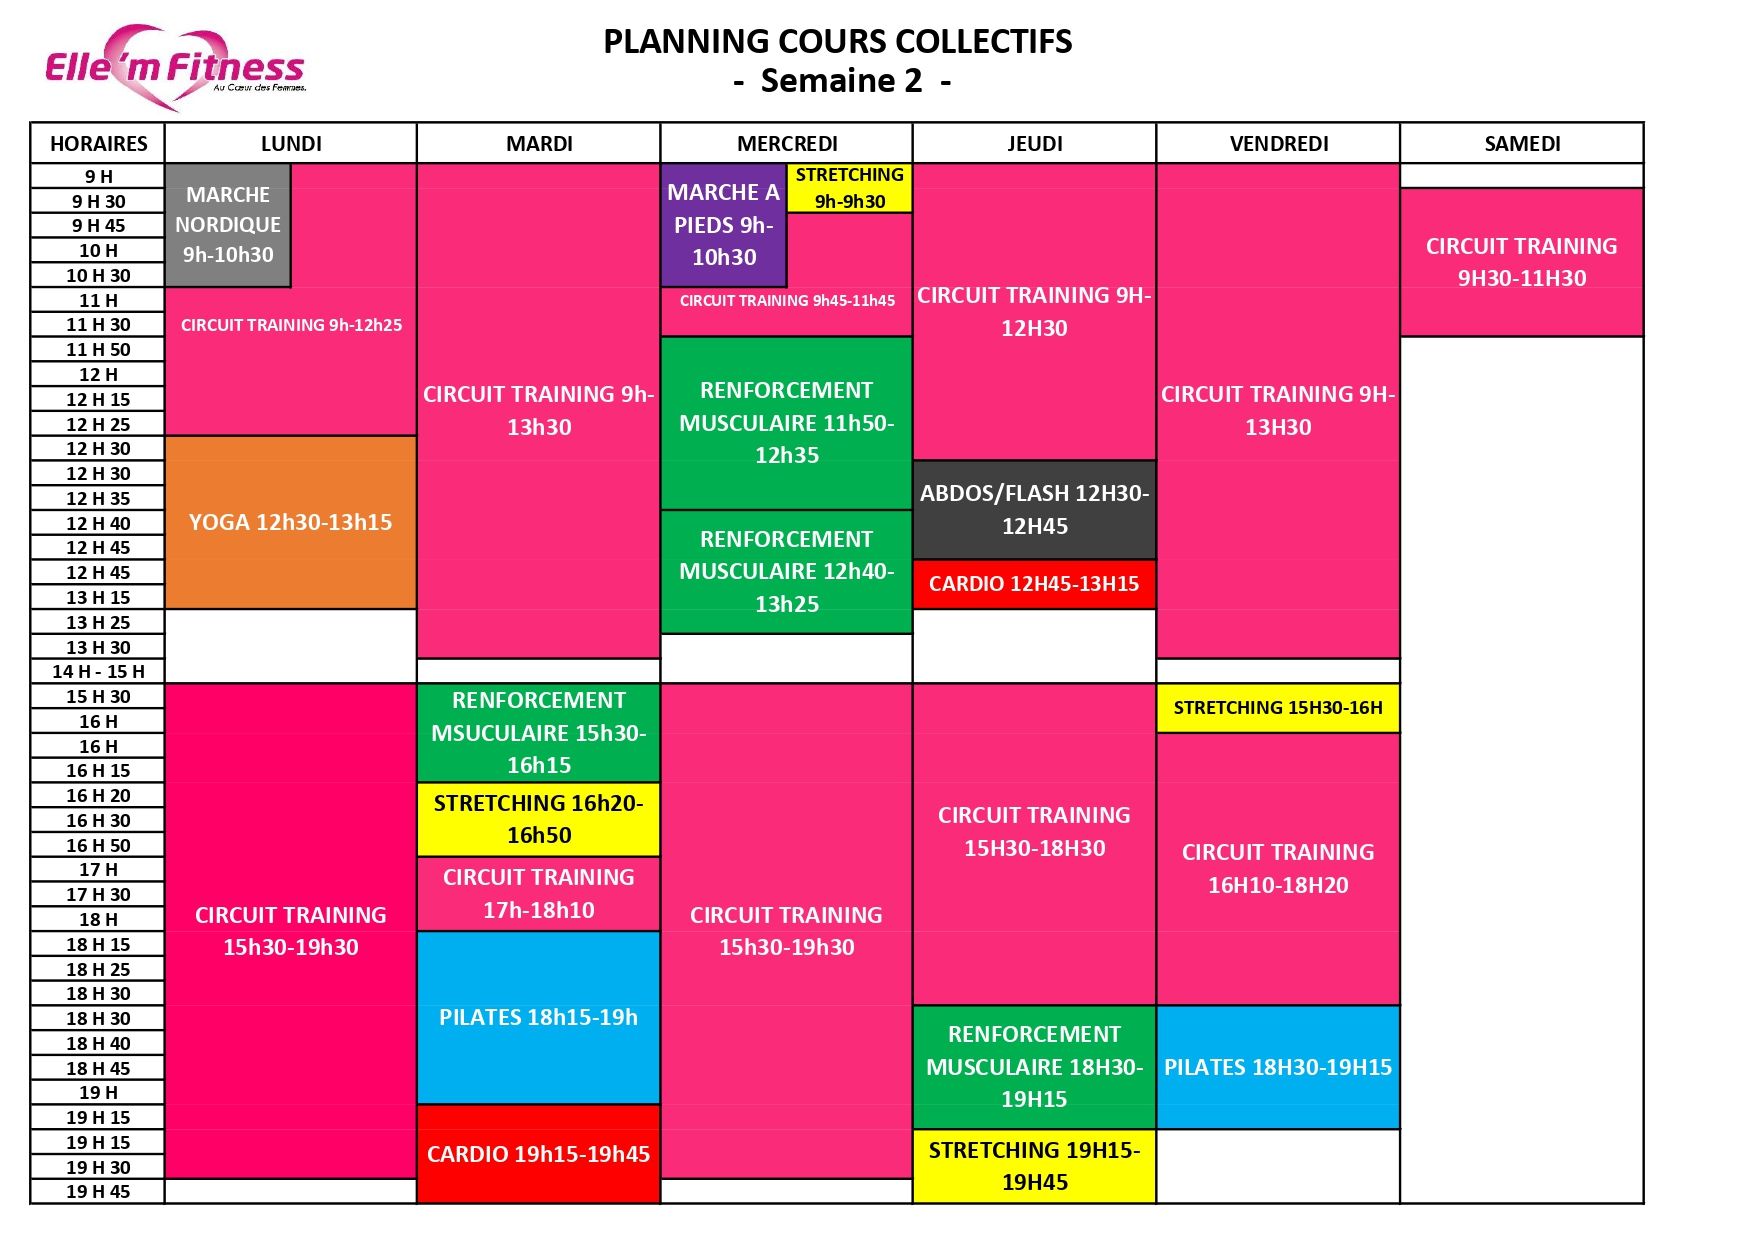 Planning cours semaine 2